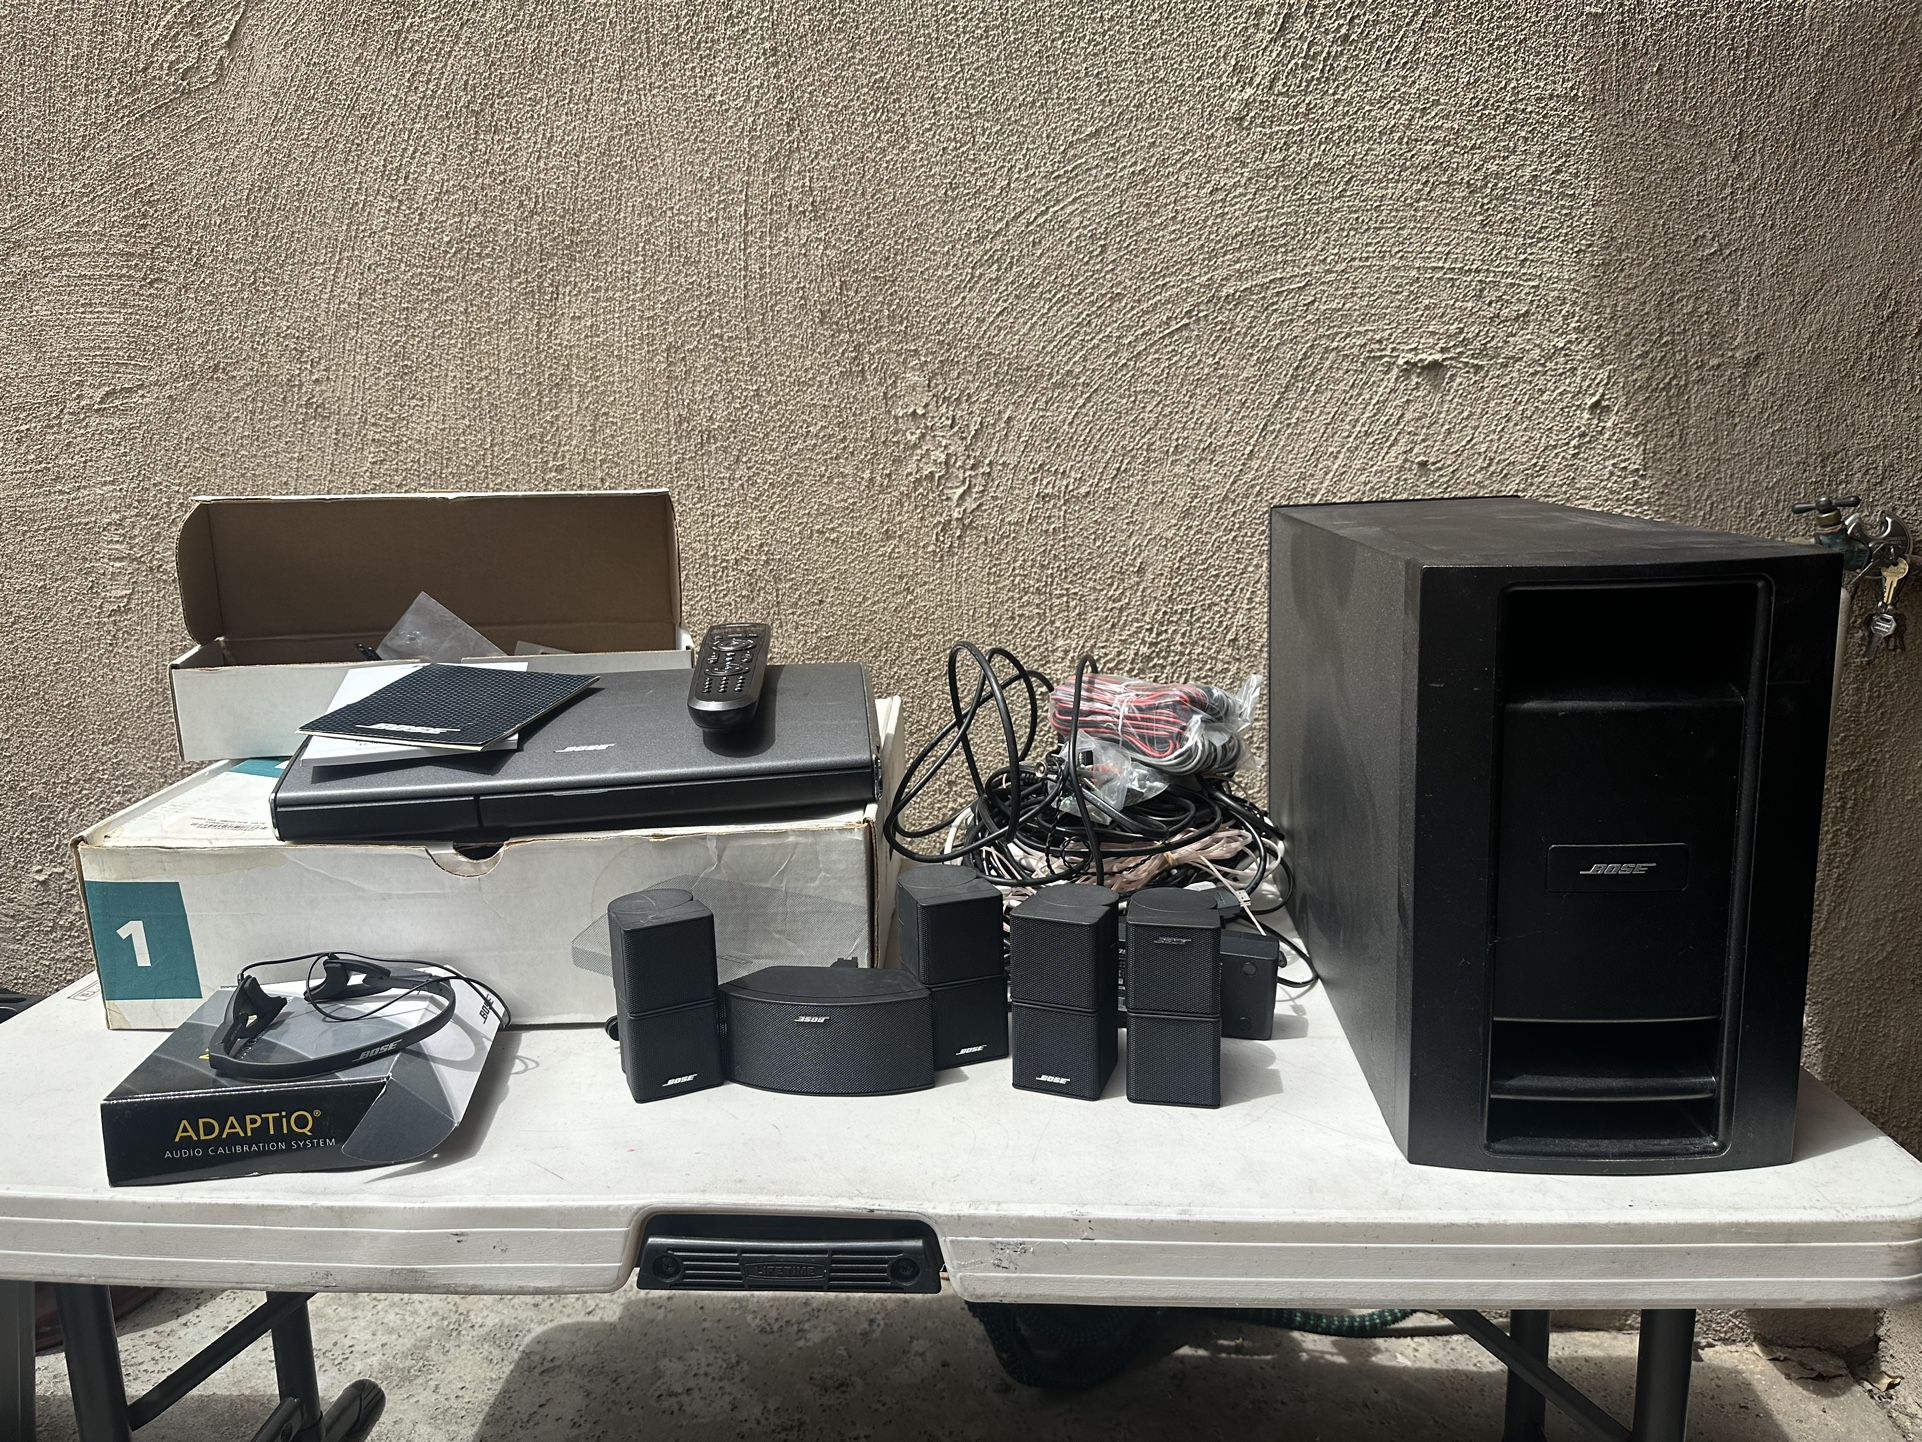 bose ps48 Lifestyle Series III DVD home entertainment system for Sale Huntington Beach, CA